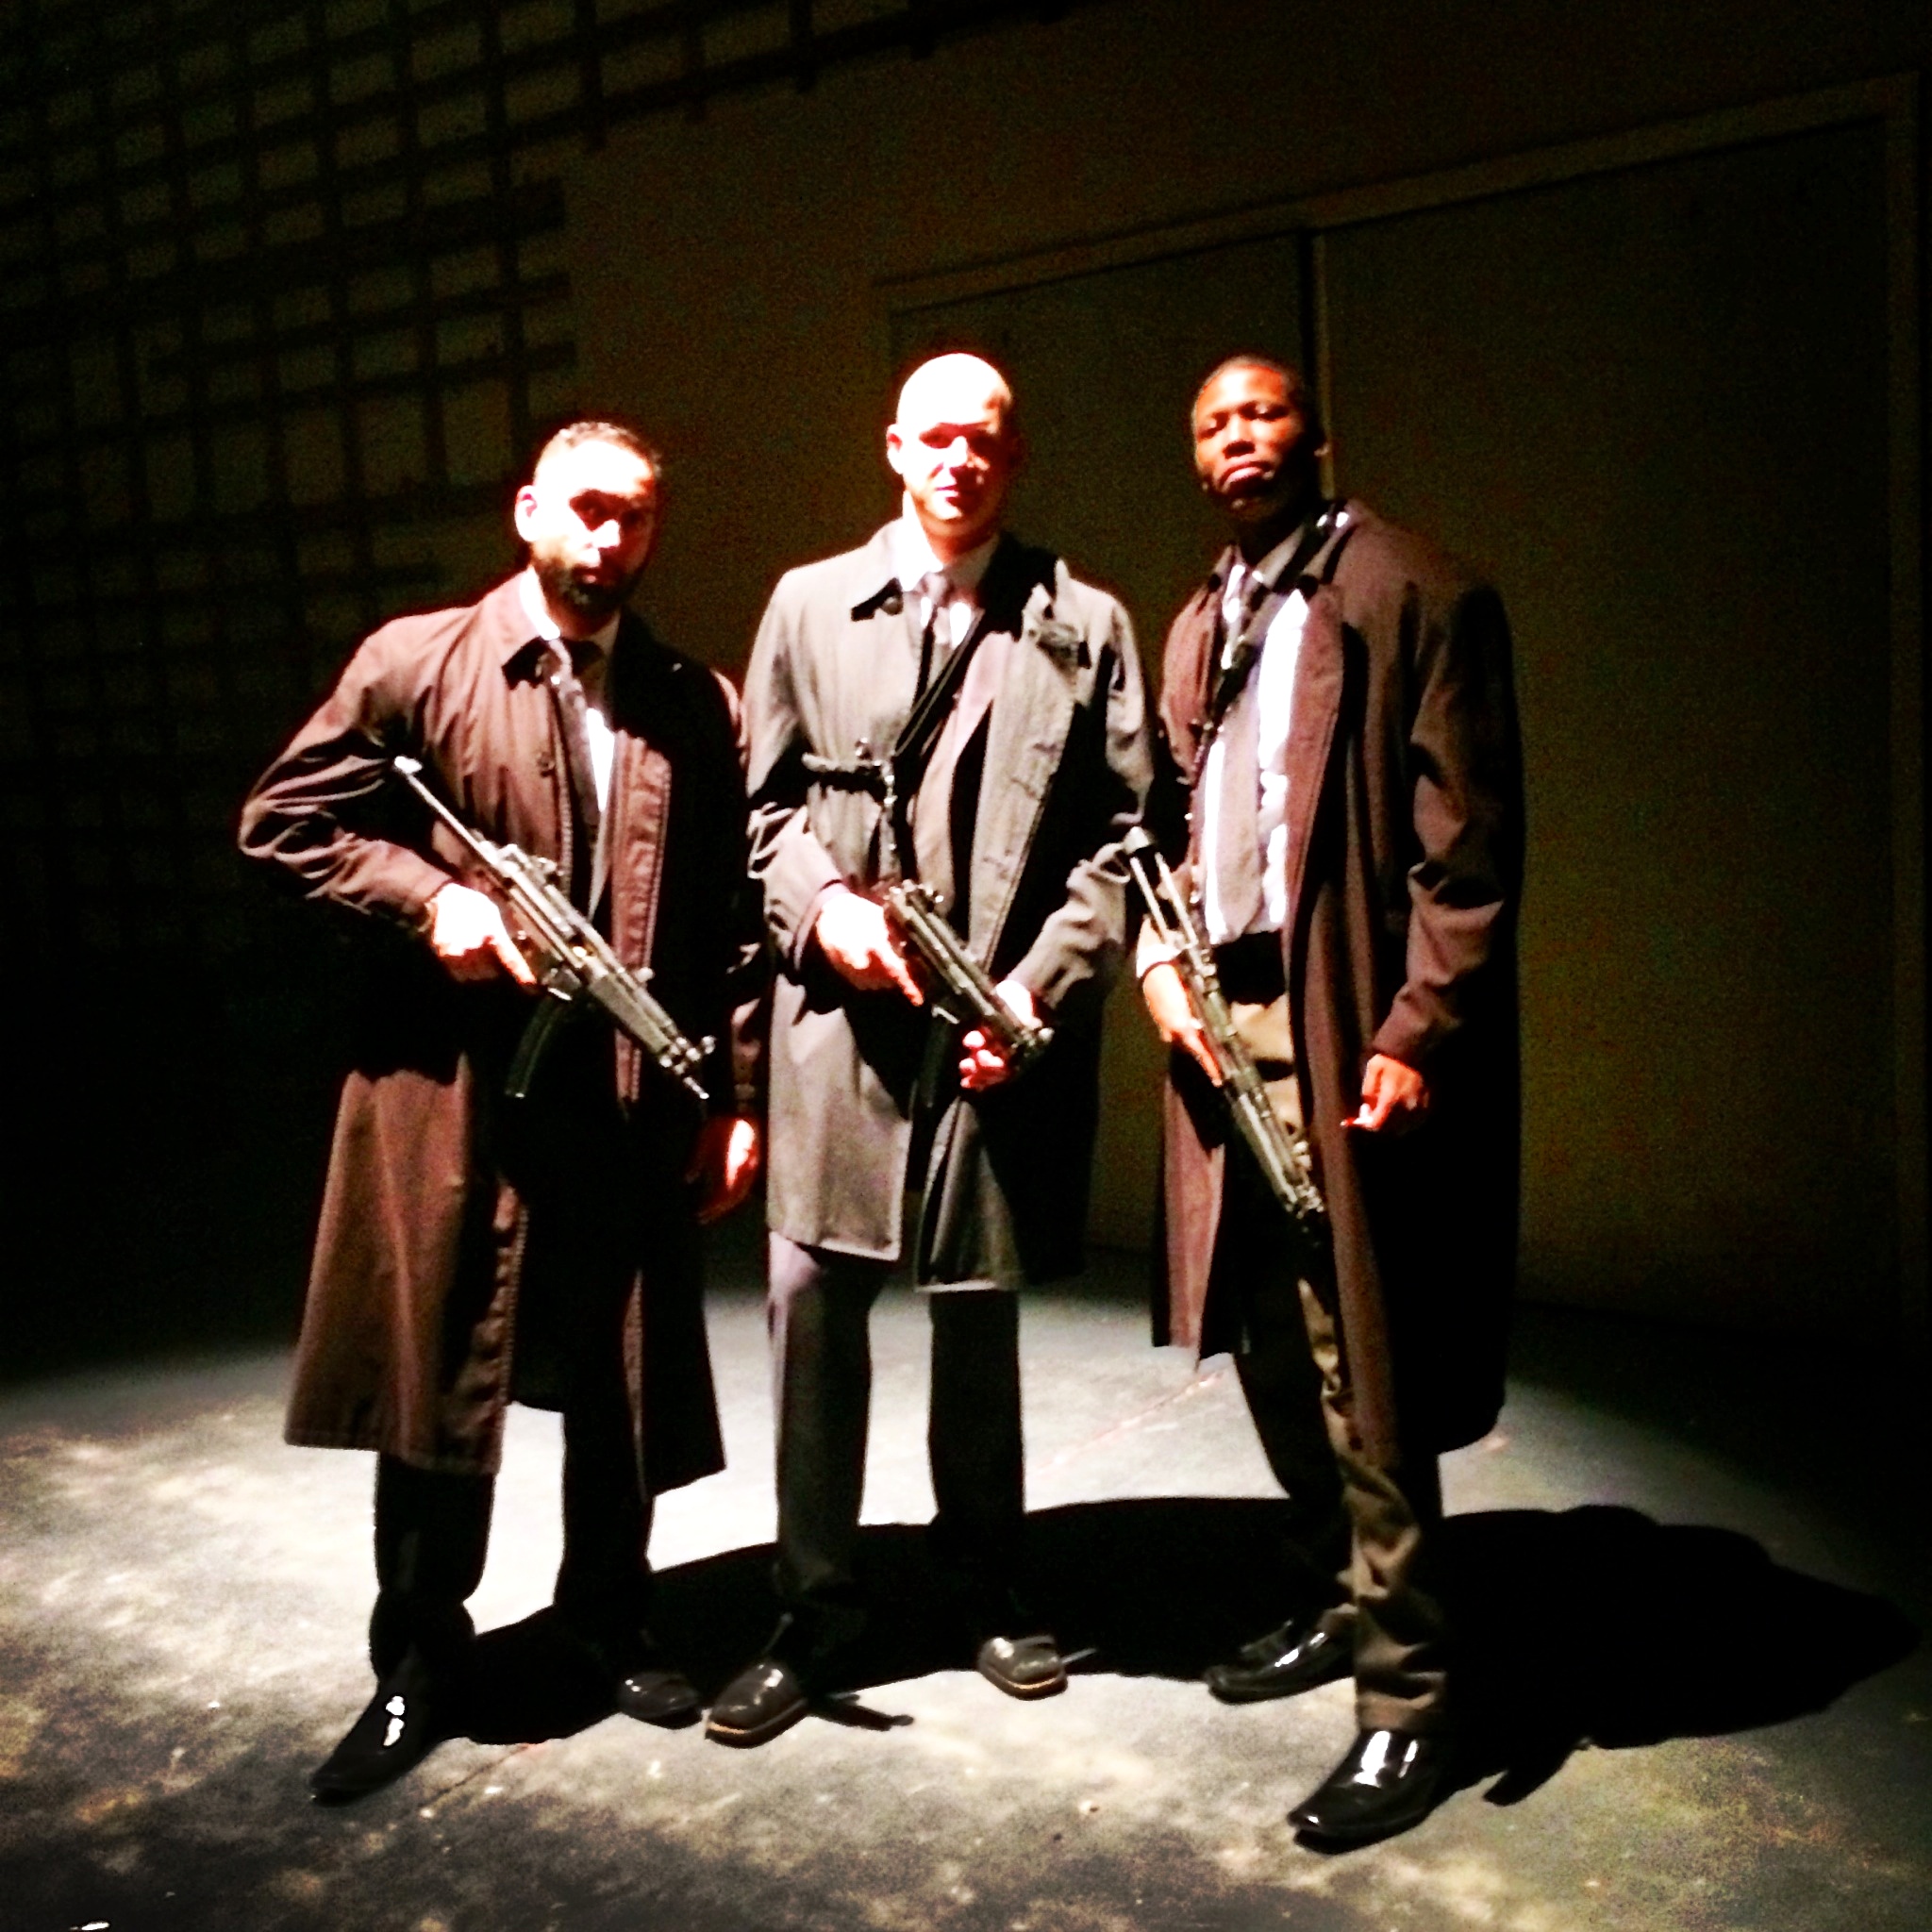 Sam Sheikhan on set of the feature film, The Purge 2: Anarchy with actors Paul Gorvin & Mitch Adams...